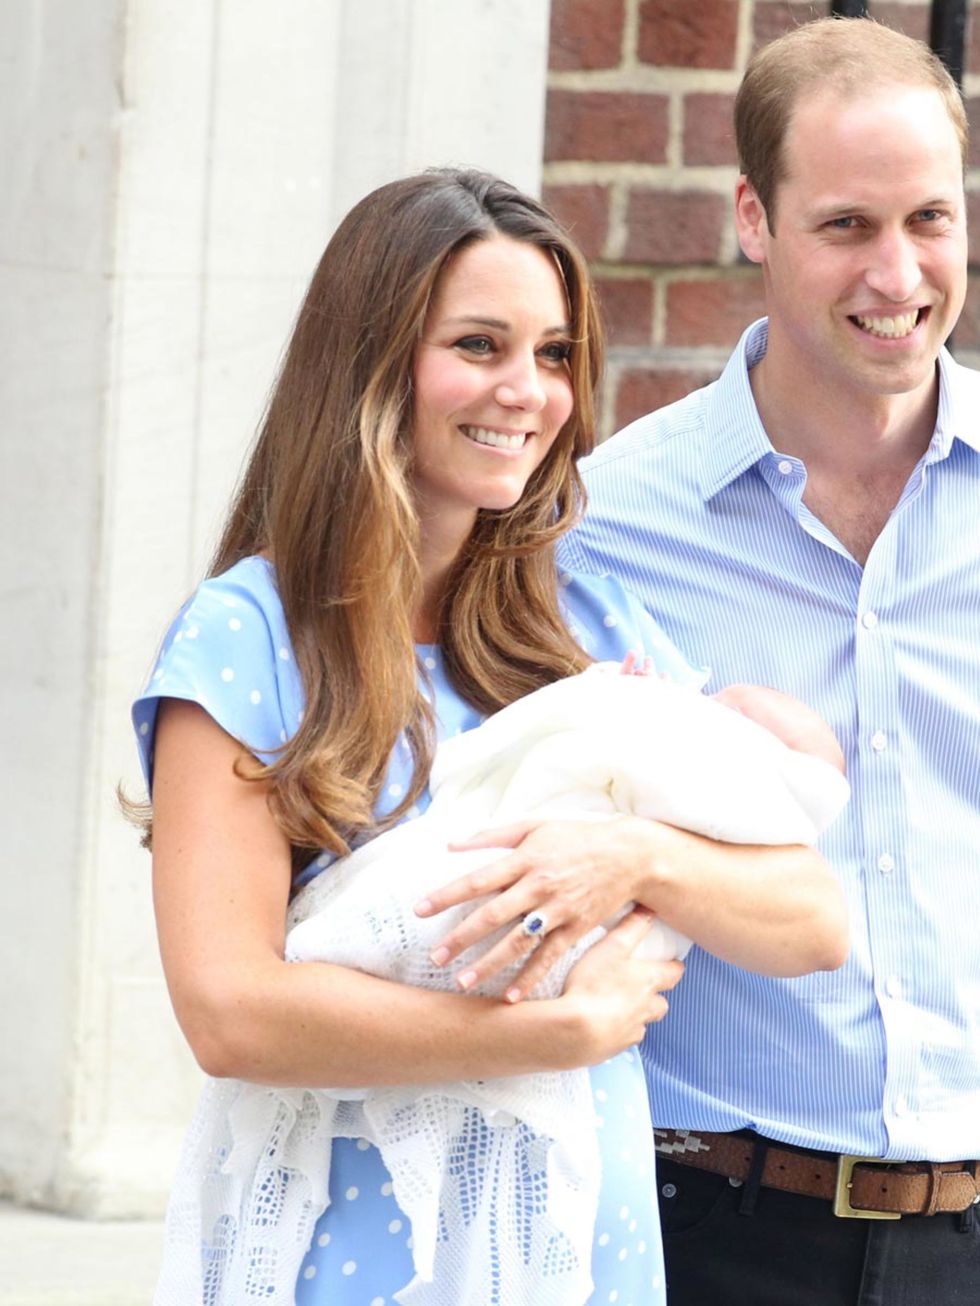 The Royal Birth in Pictures